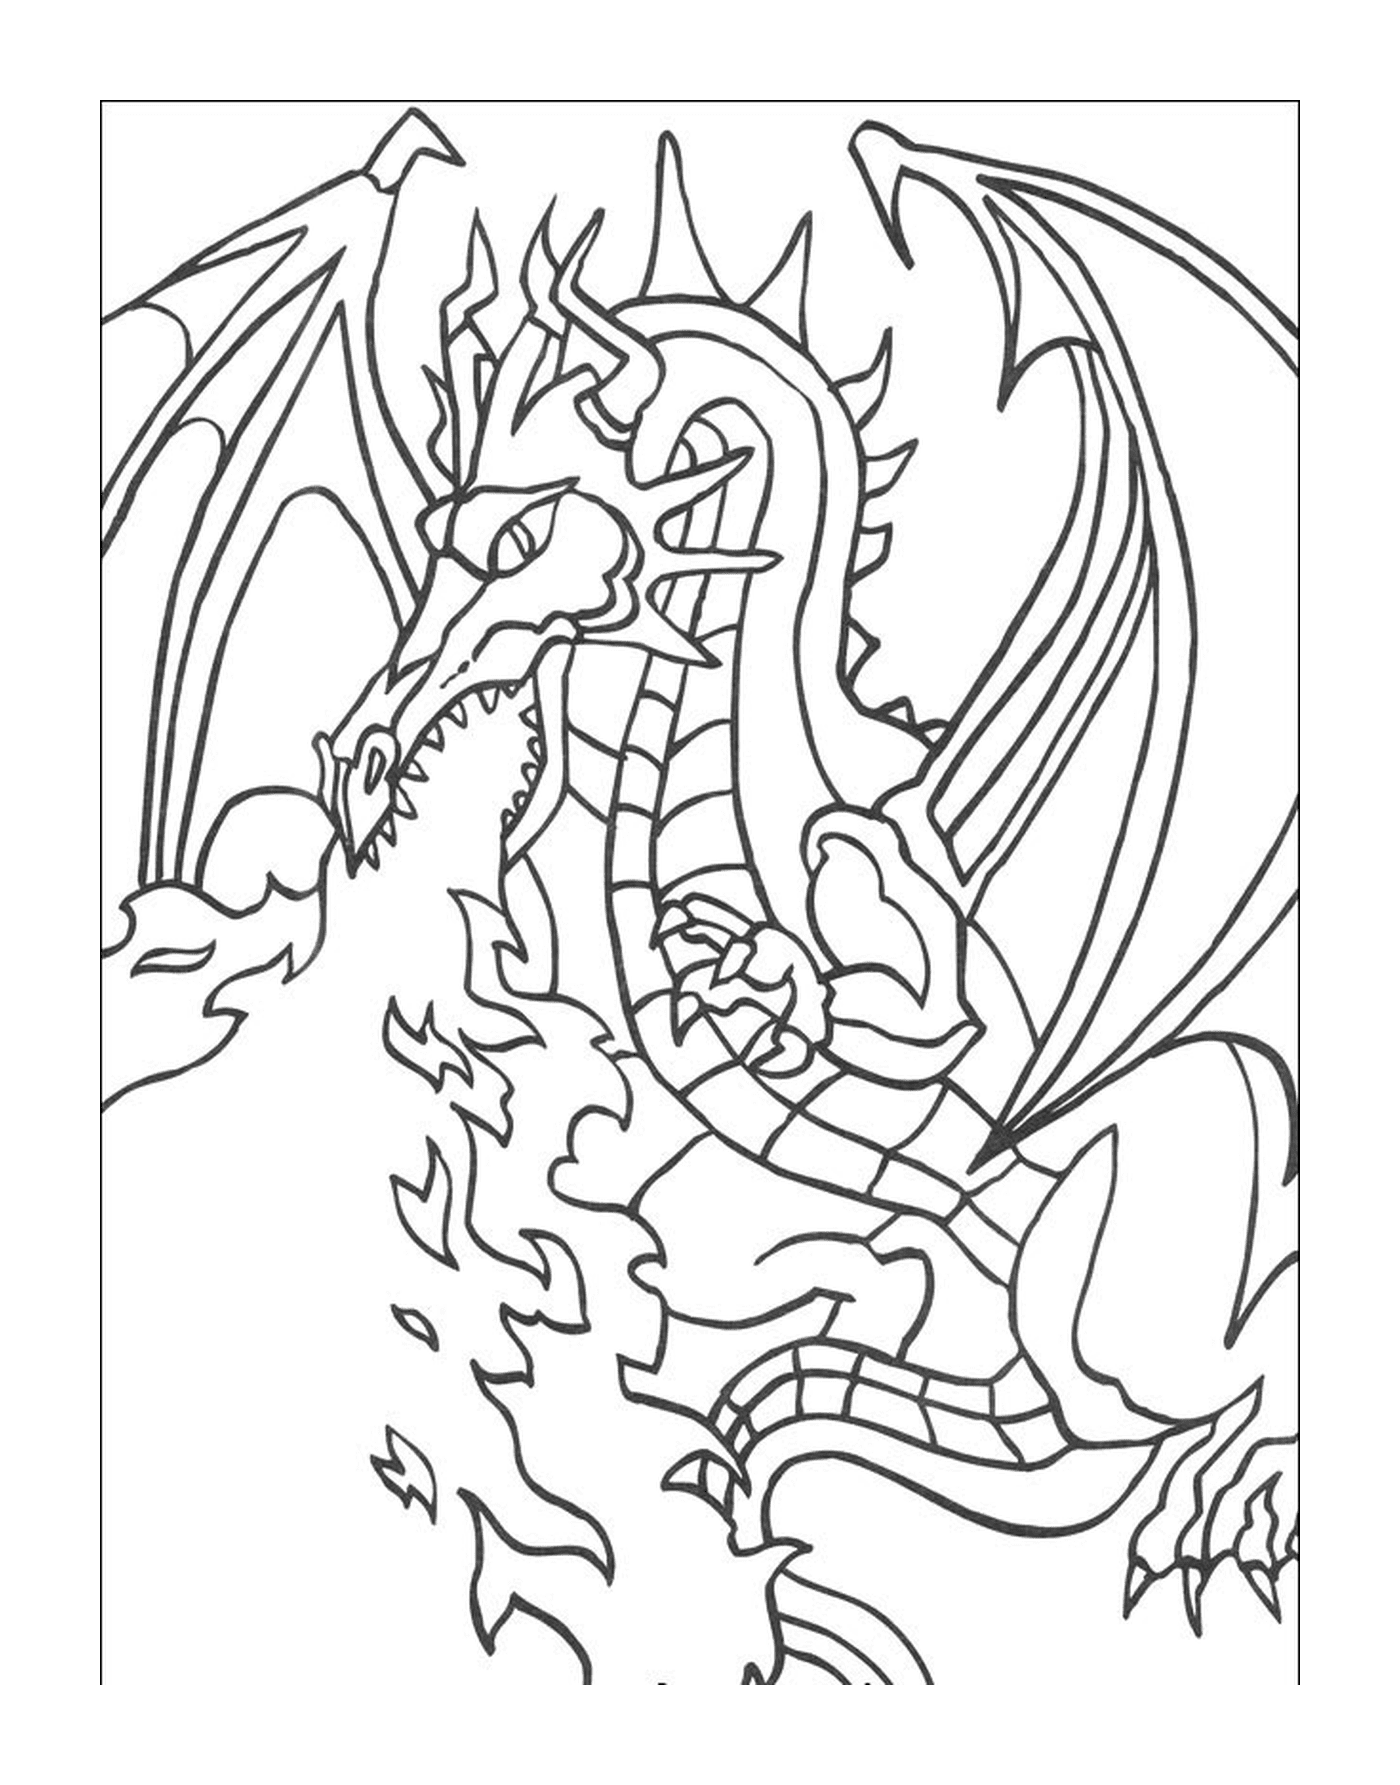  Dragon smoking a cigarette with a breathlessness 